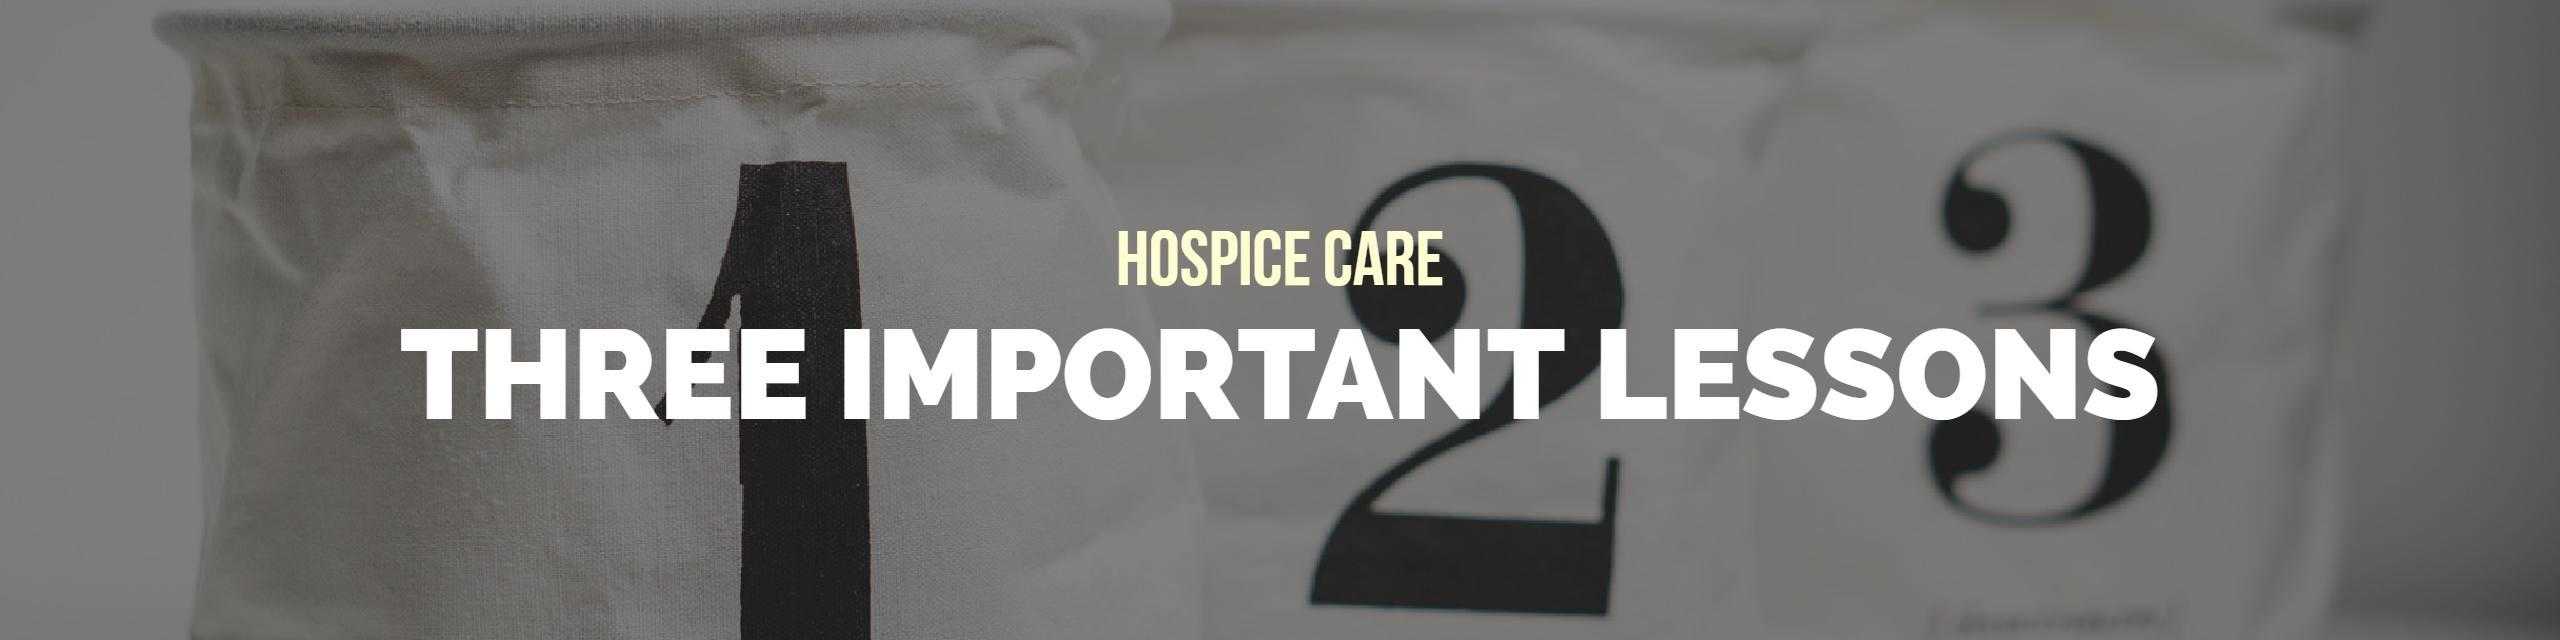 hospice care lessons